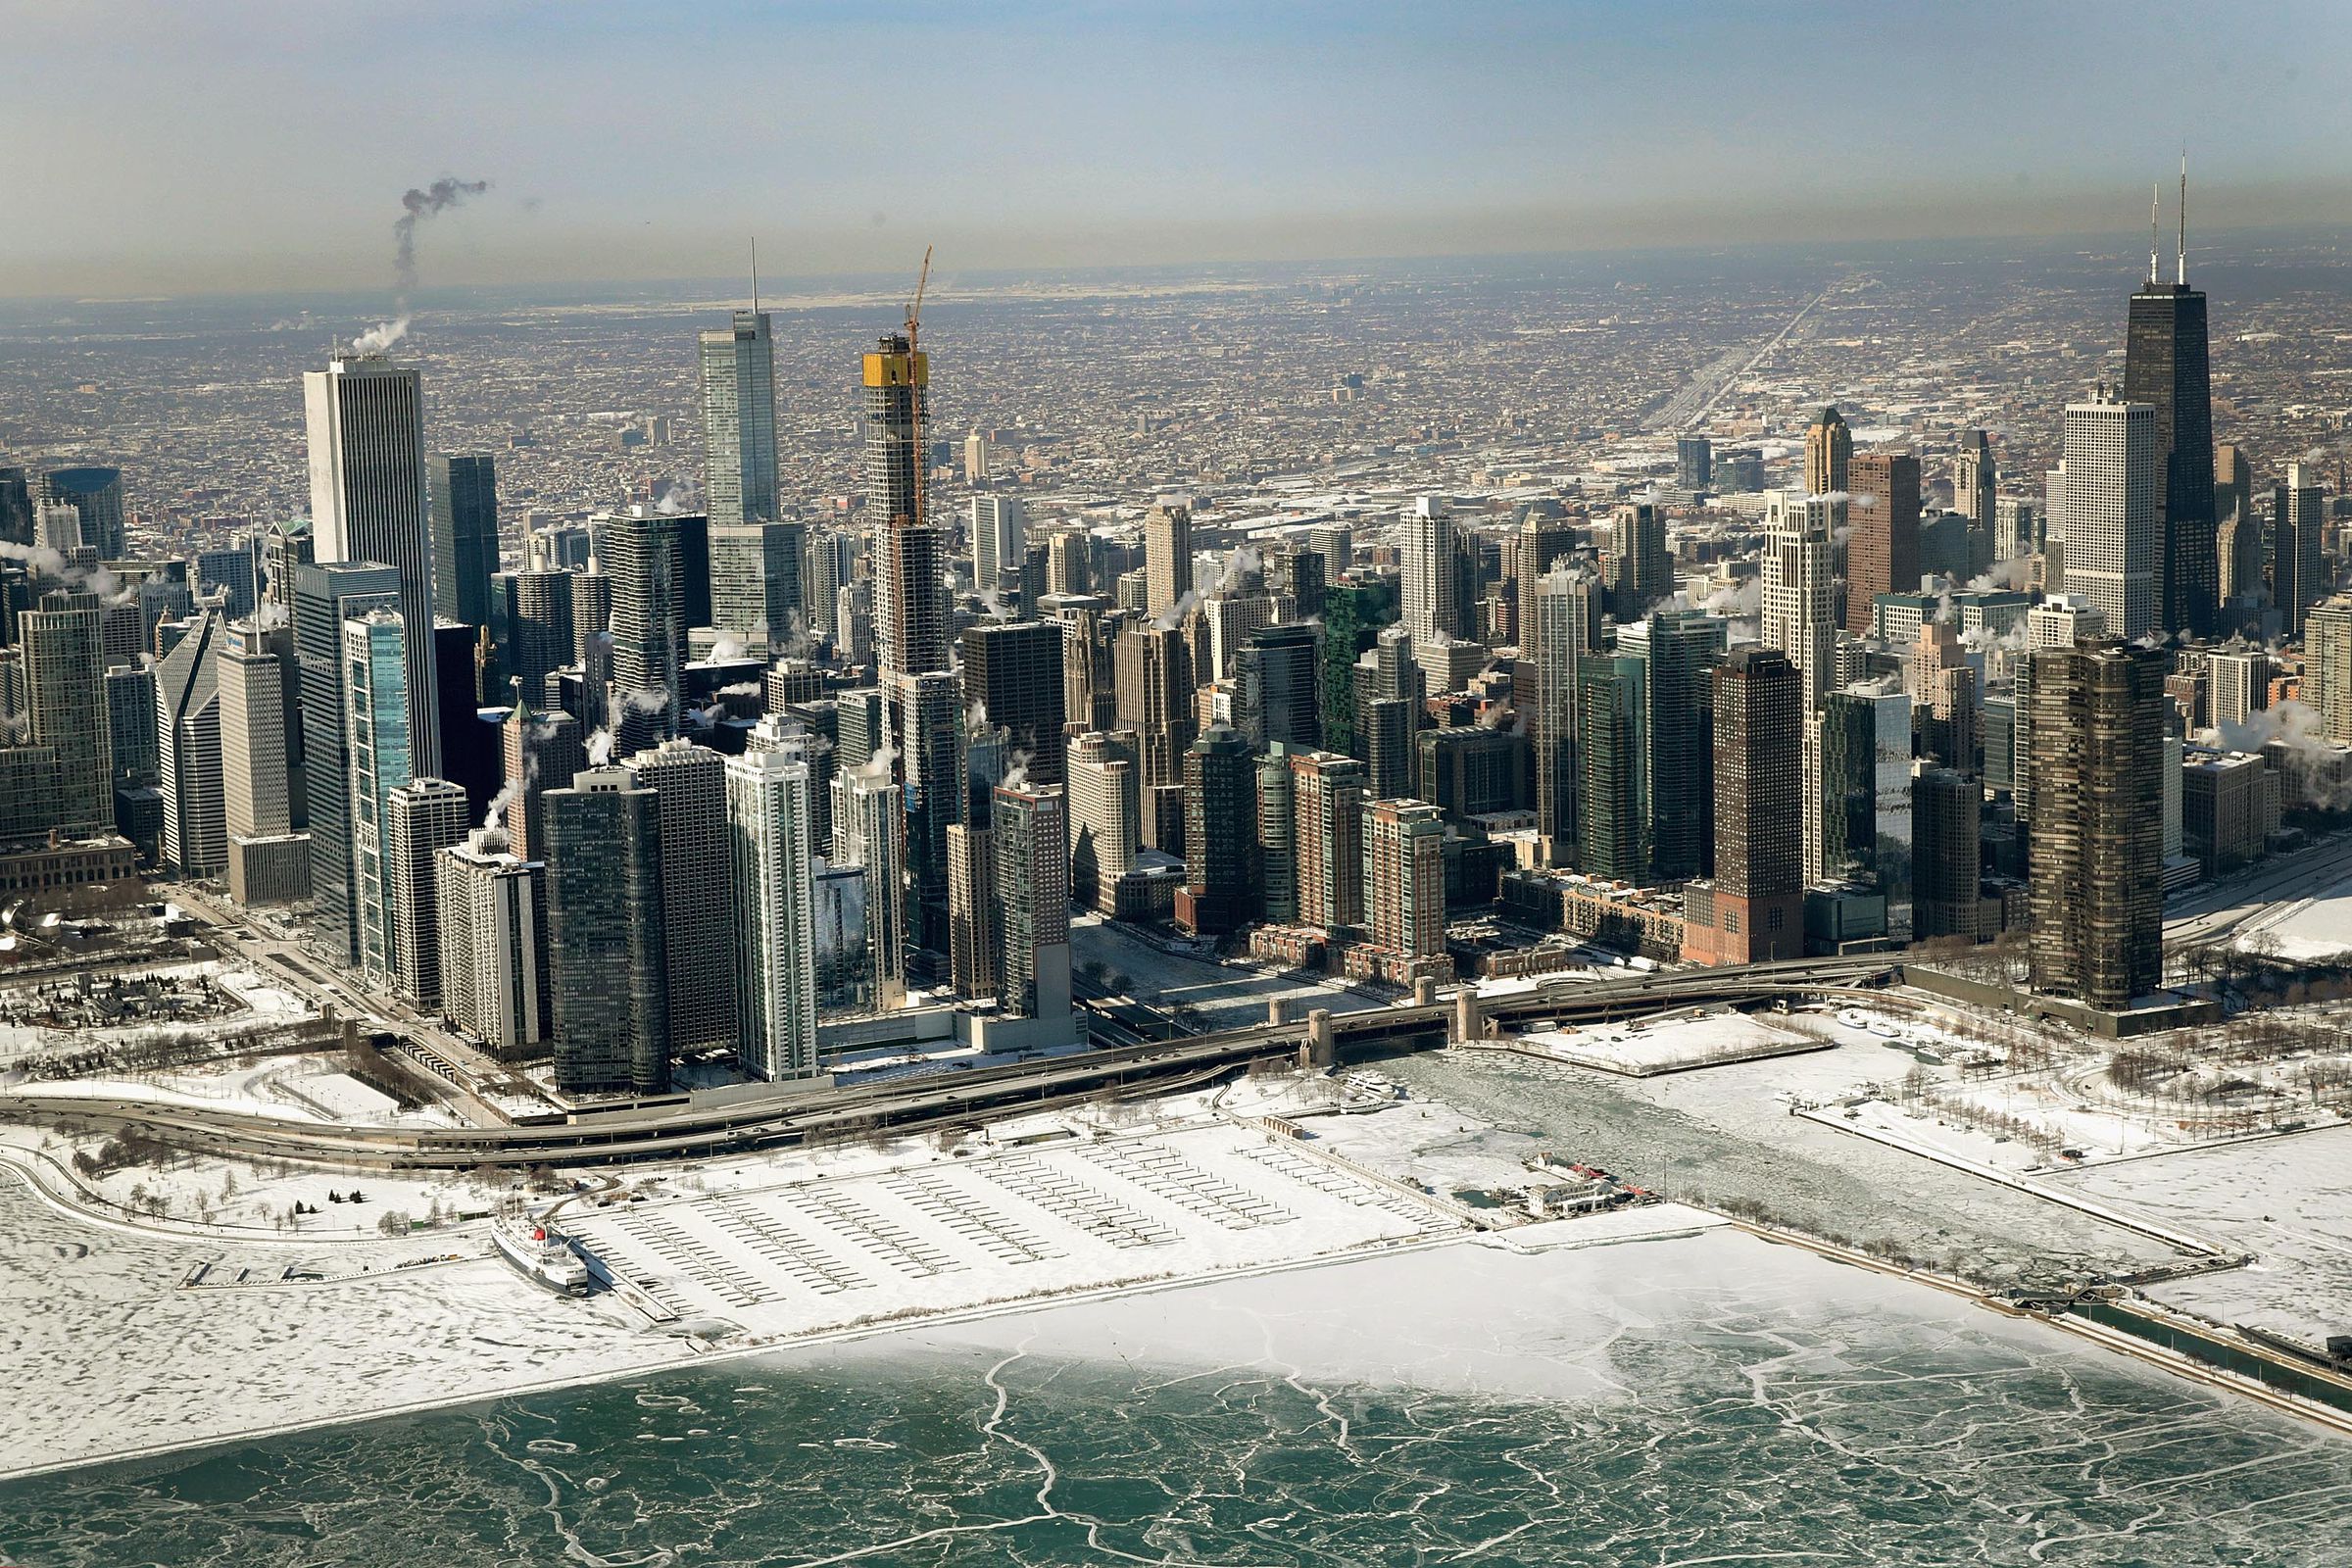 Ice builds up along the shore of Lake Michigan as temperatures during the past two days have dipped to lows around -20 degrees on January 31, 2019 in Chicago, Illinois. Businesses and schools have closed, Amtrak has suspended service into the city, more than a thousand flights have been cancelled and mail delivery has been suspended as the city copes with record-setting low temperatures.